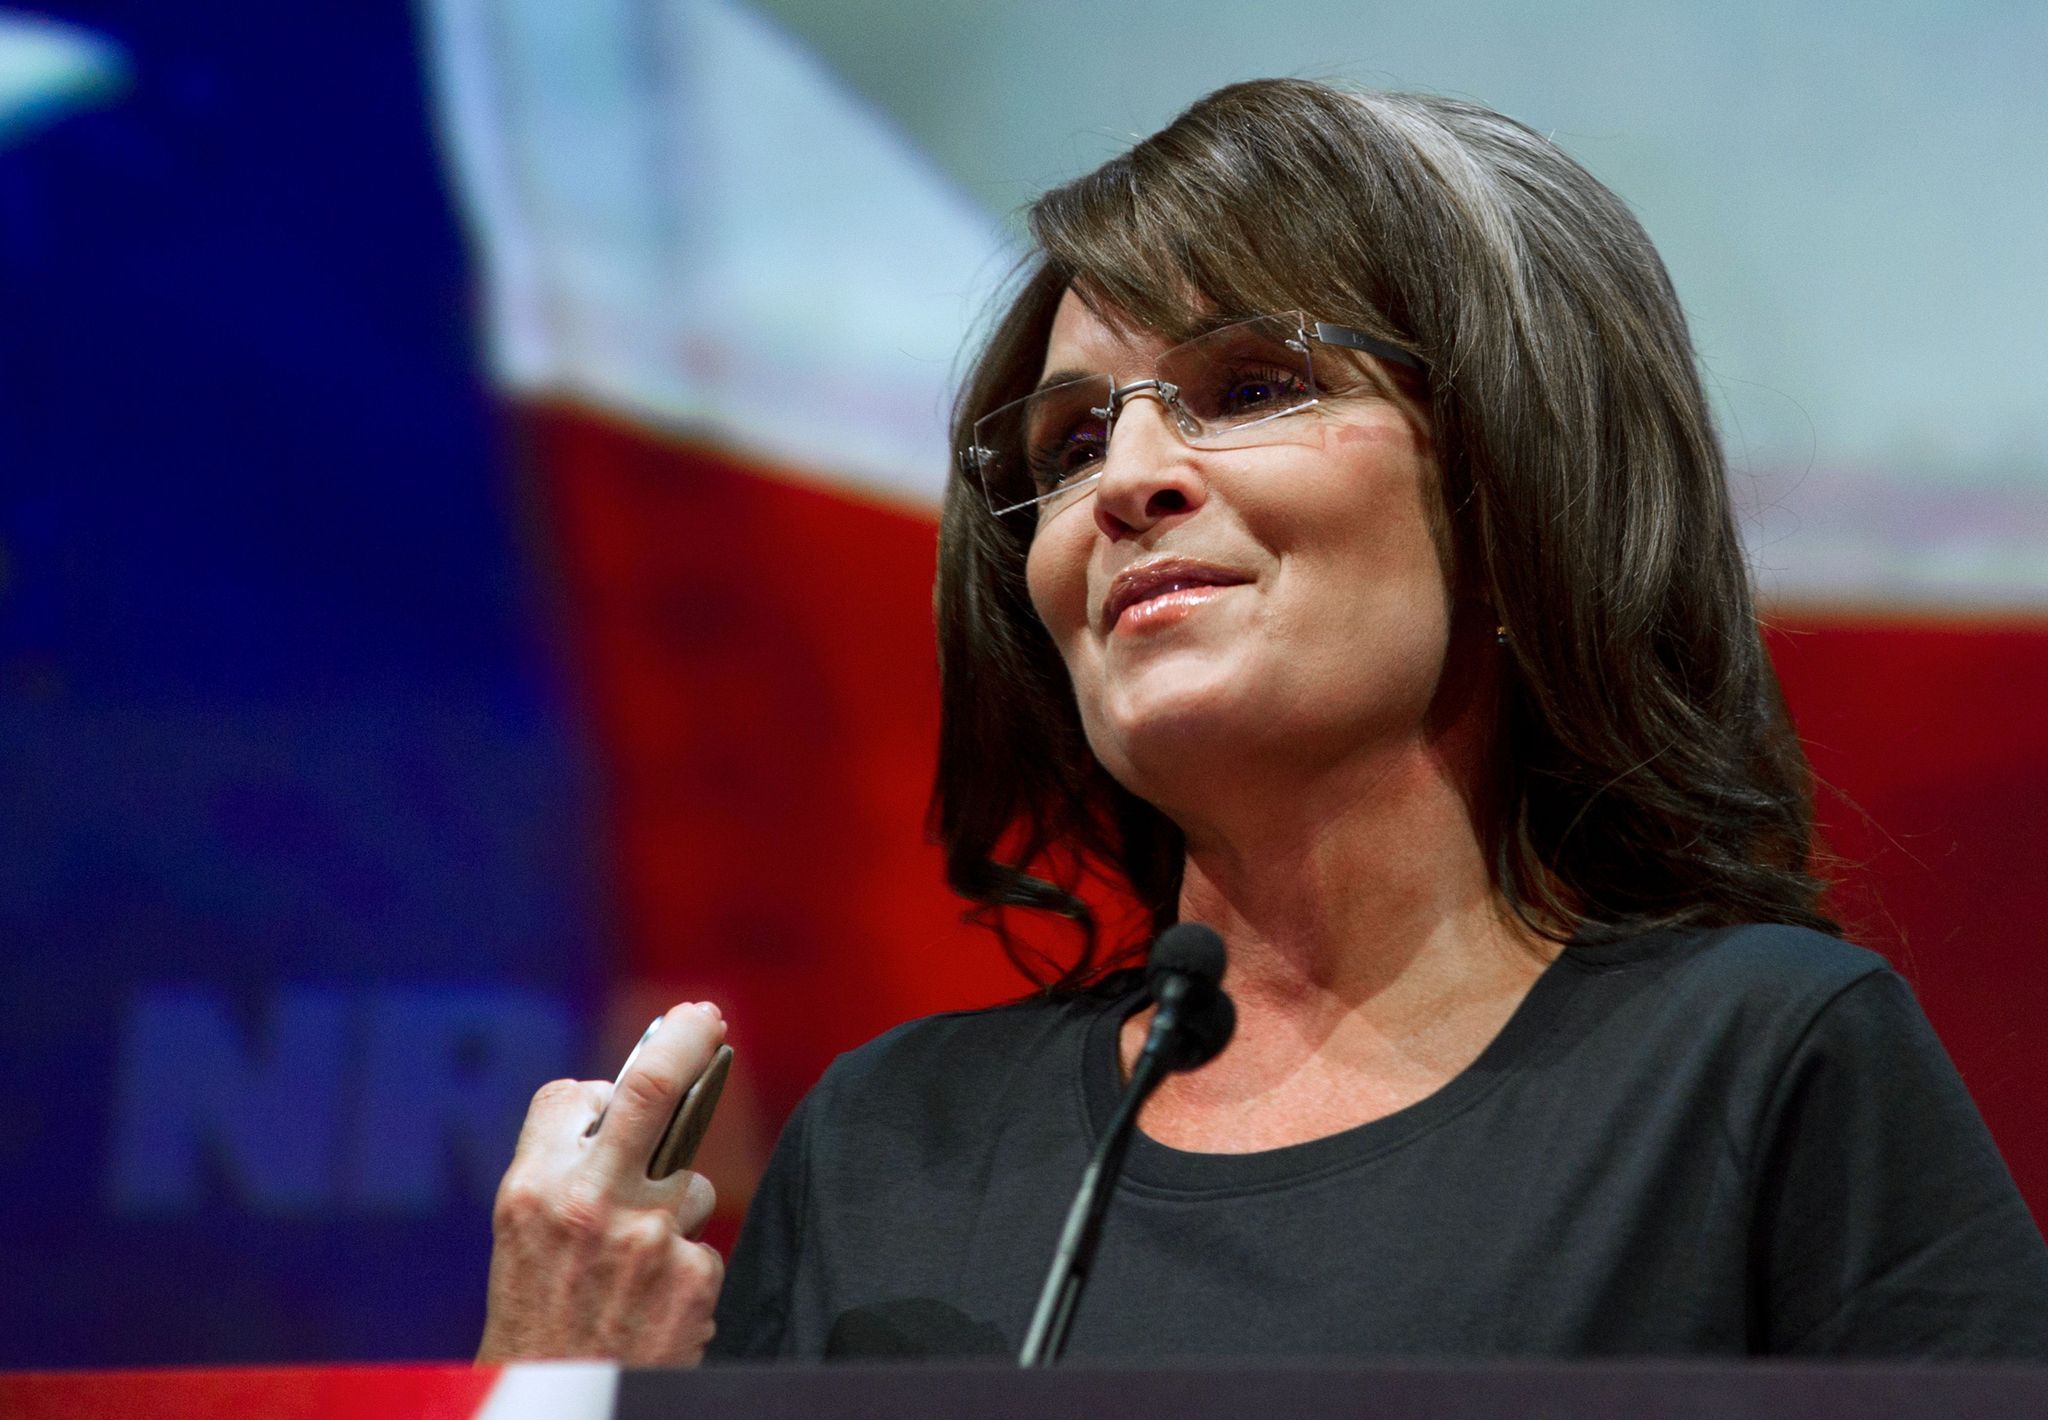 Sarah Palin launches online channel.